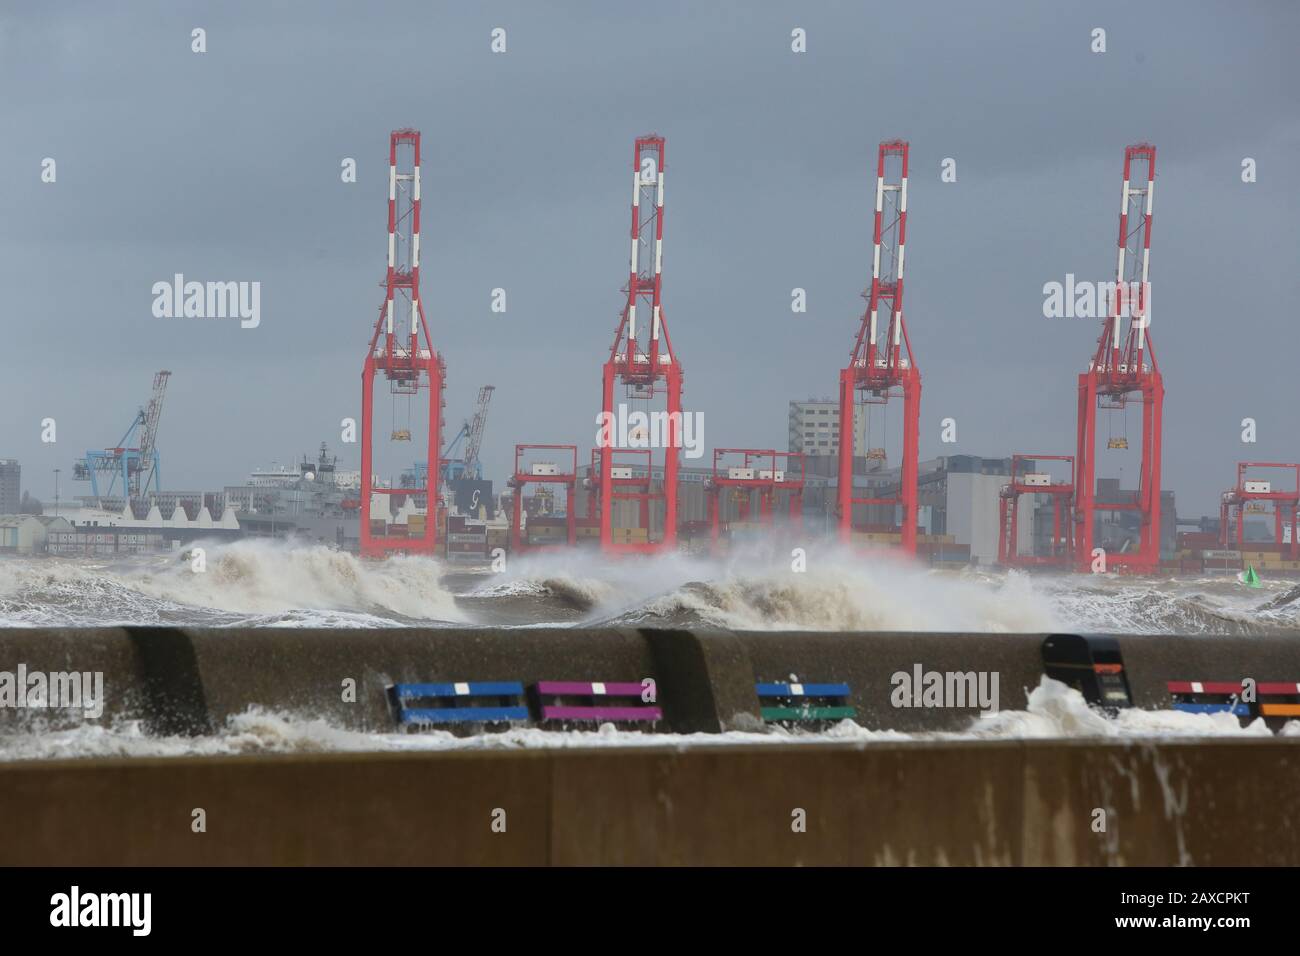 Liverpool,Uk stormy day on the river mersey as storm dennis is named for weekend credit Ian Fairbrother/Alamy Stock Photos Stock Photo